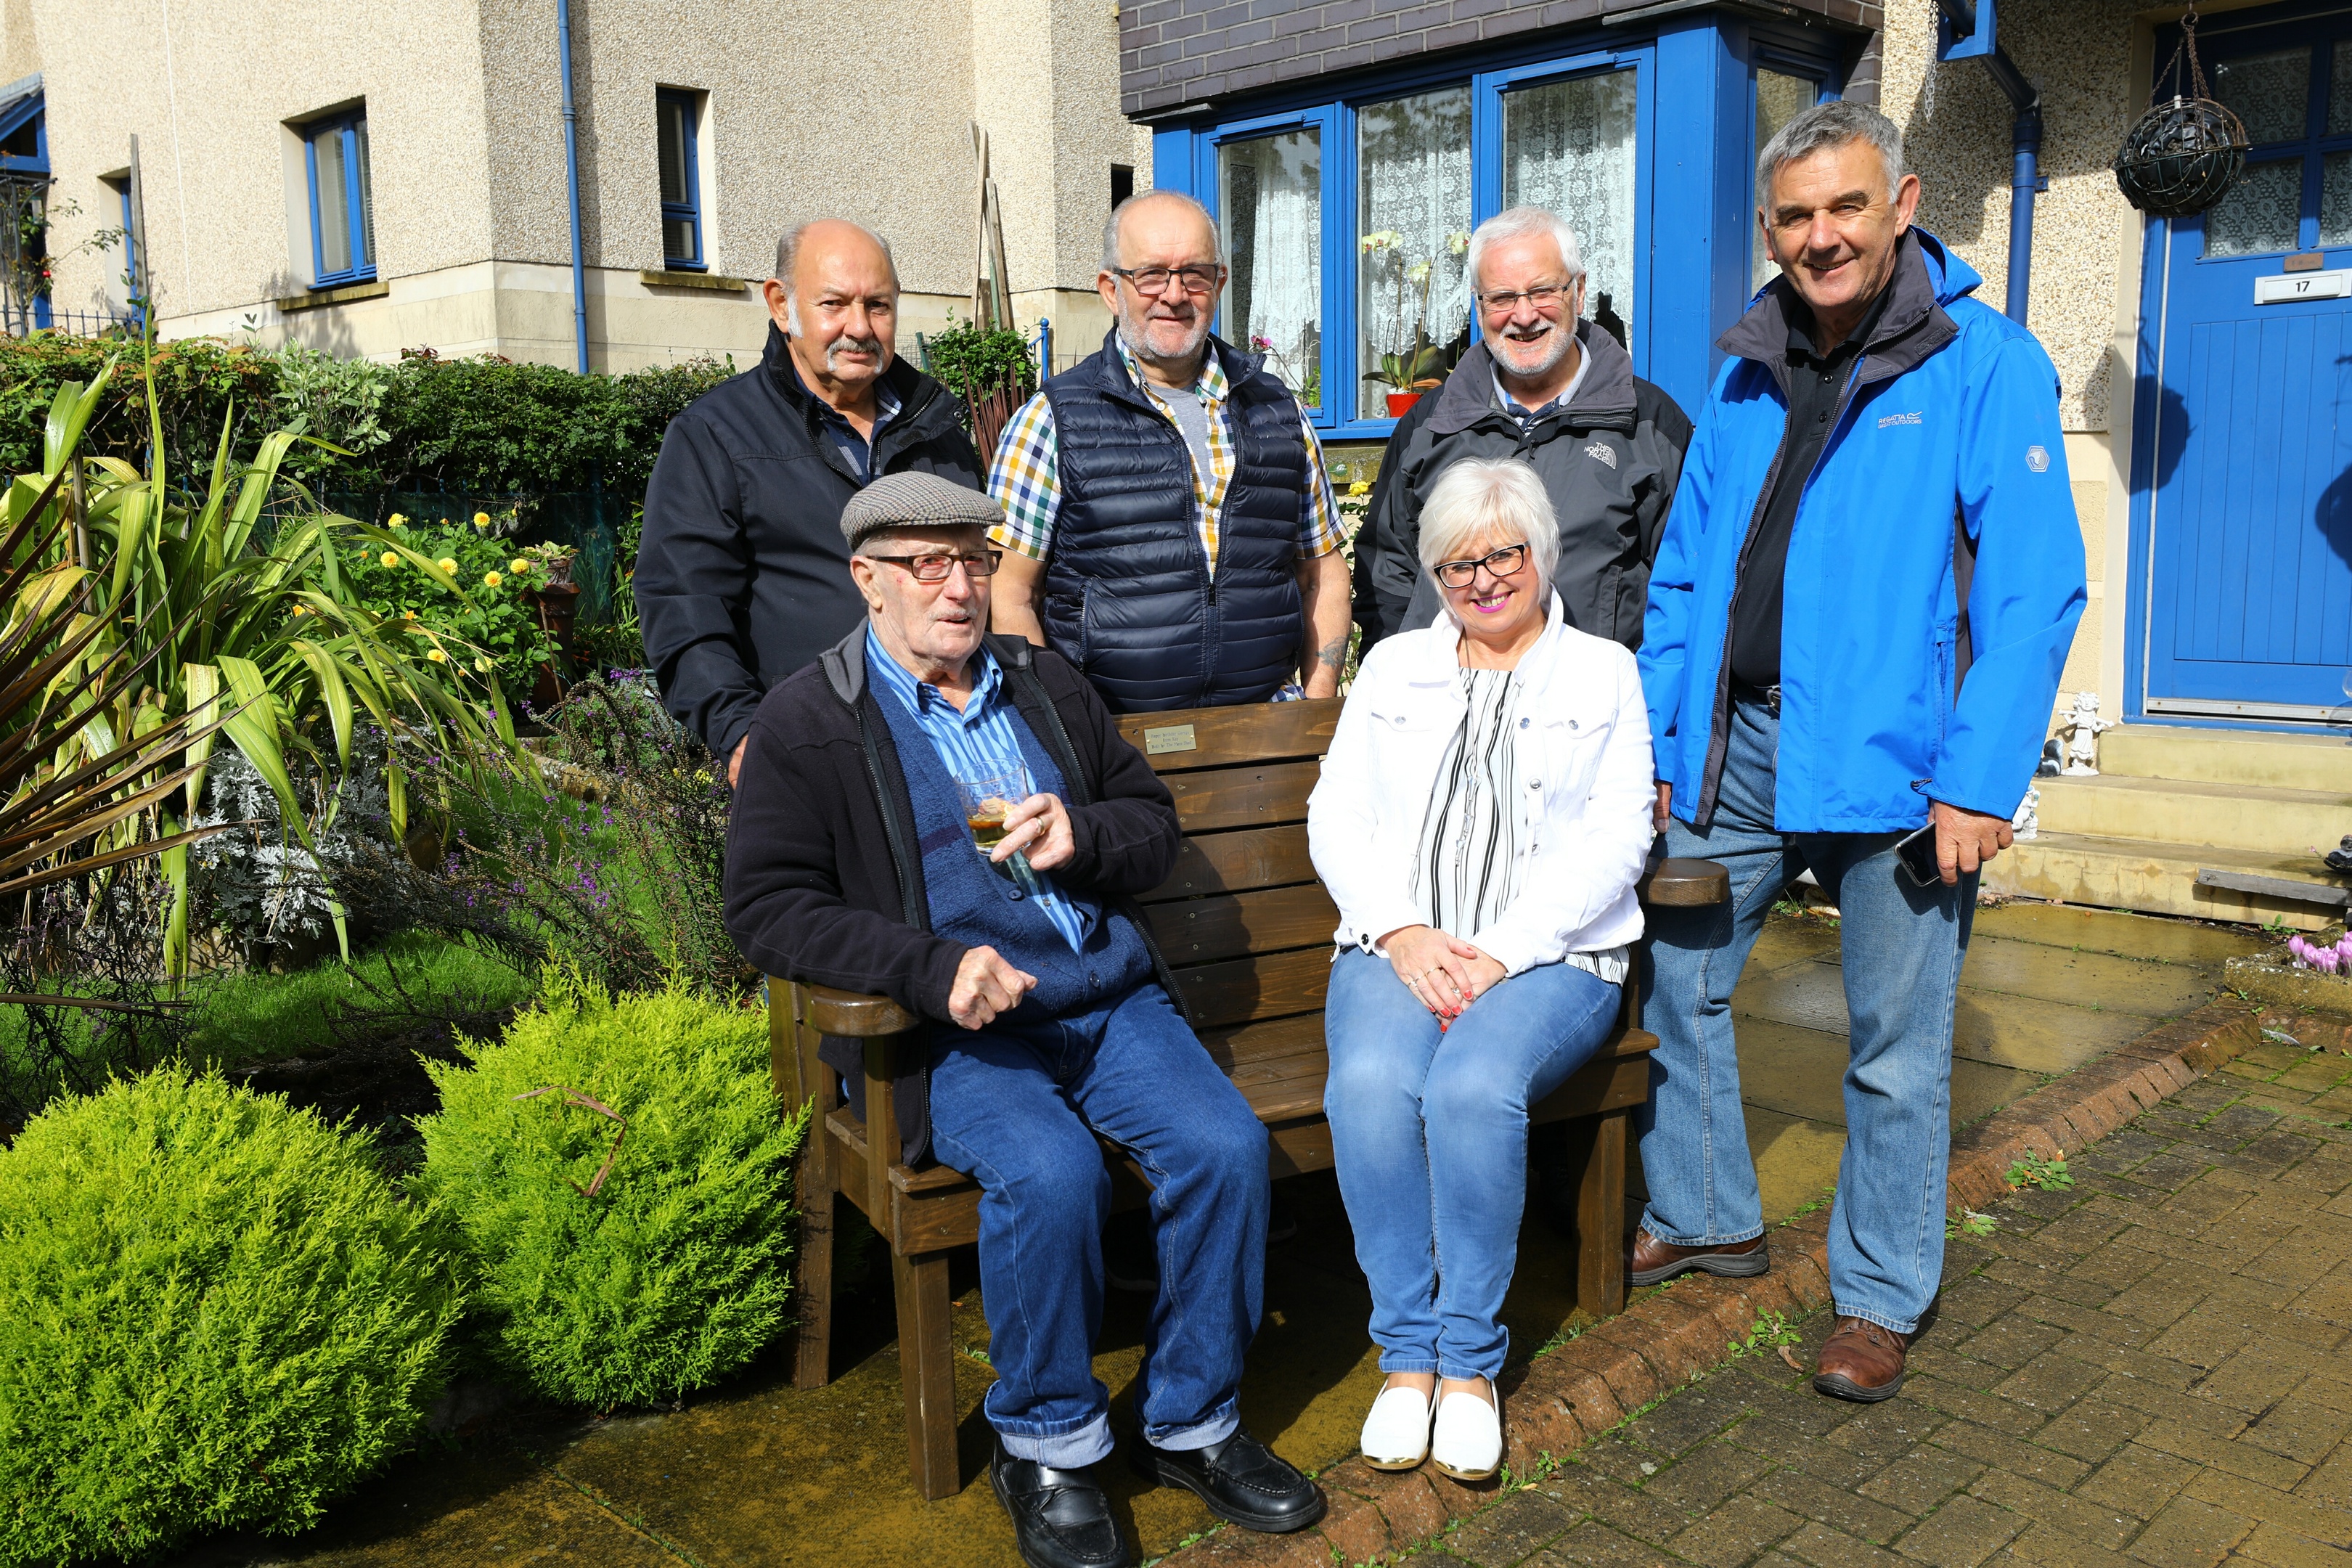 George Wilson, seated left, on his new bench from the Arbroath Men's Shed, with Kay Sturrock and back L/R, John Pearson, who made the bench, Steve Charlton - Treasurer and Jim Christie - Chairman of the Arbroath Men's Shed.